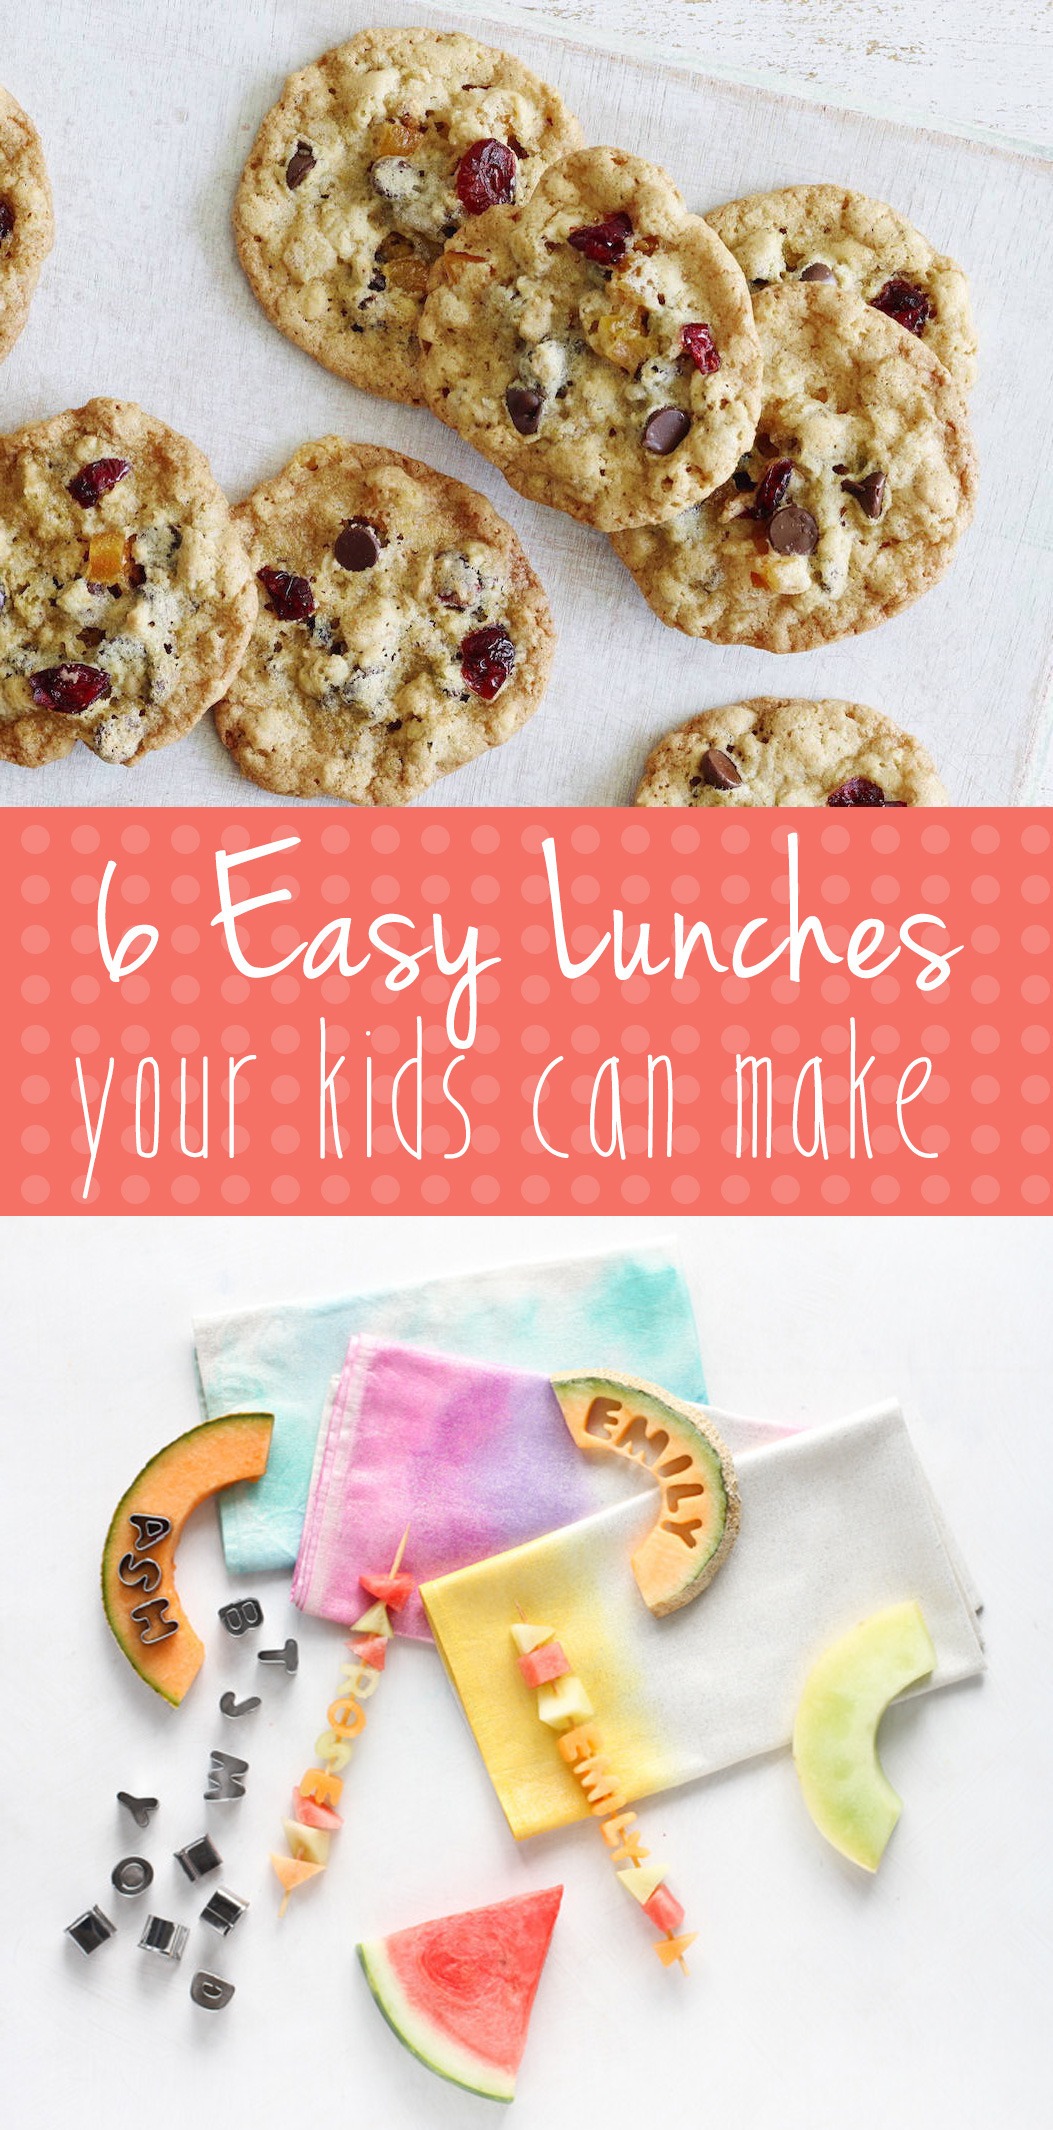 6 easy school lunches your kids can make themselves